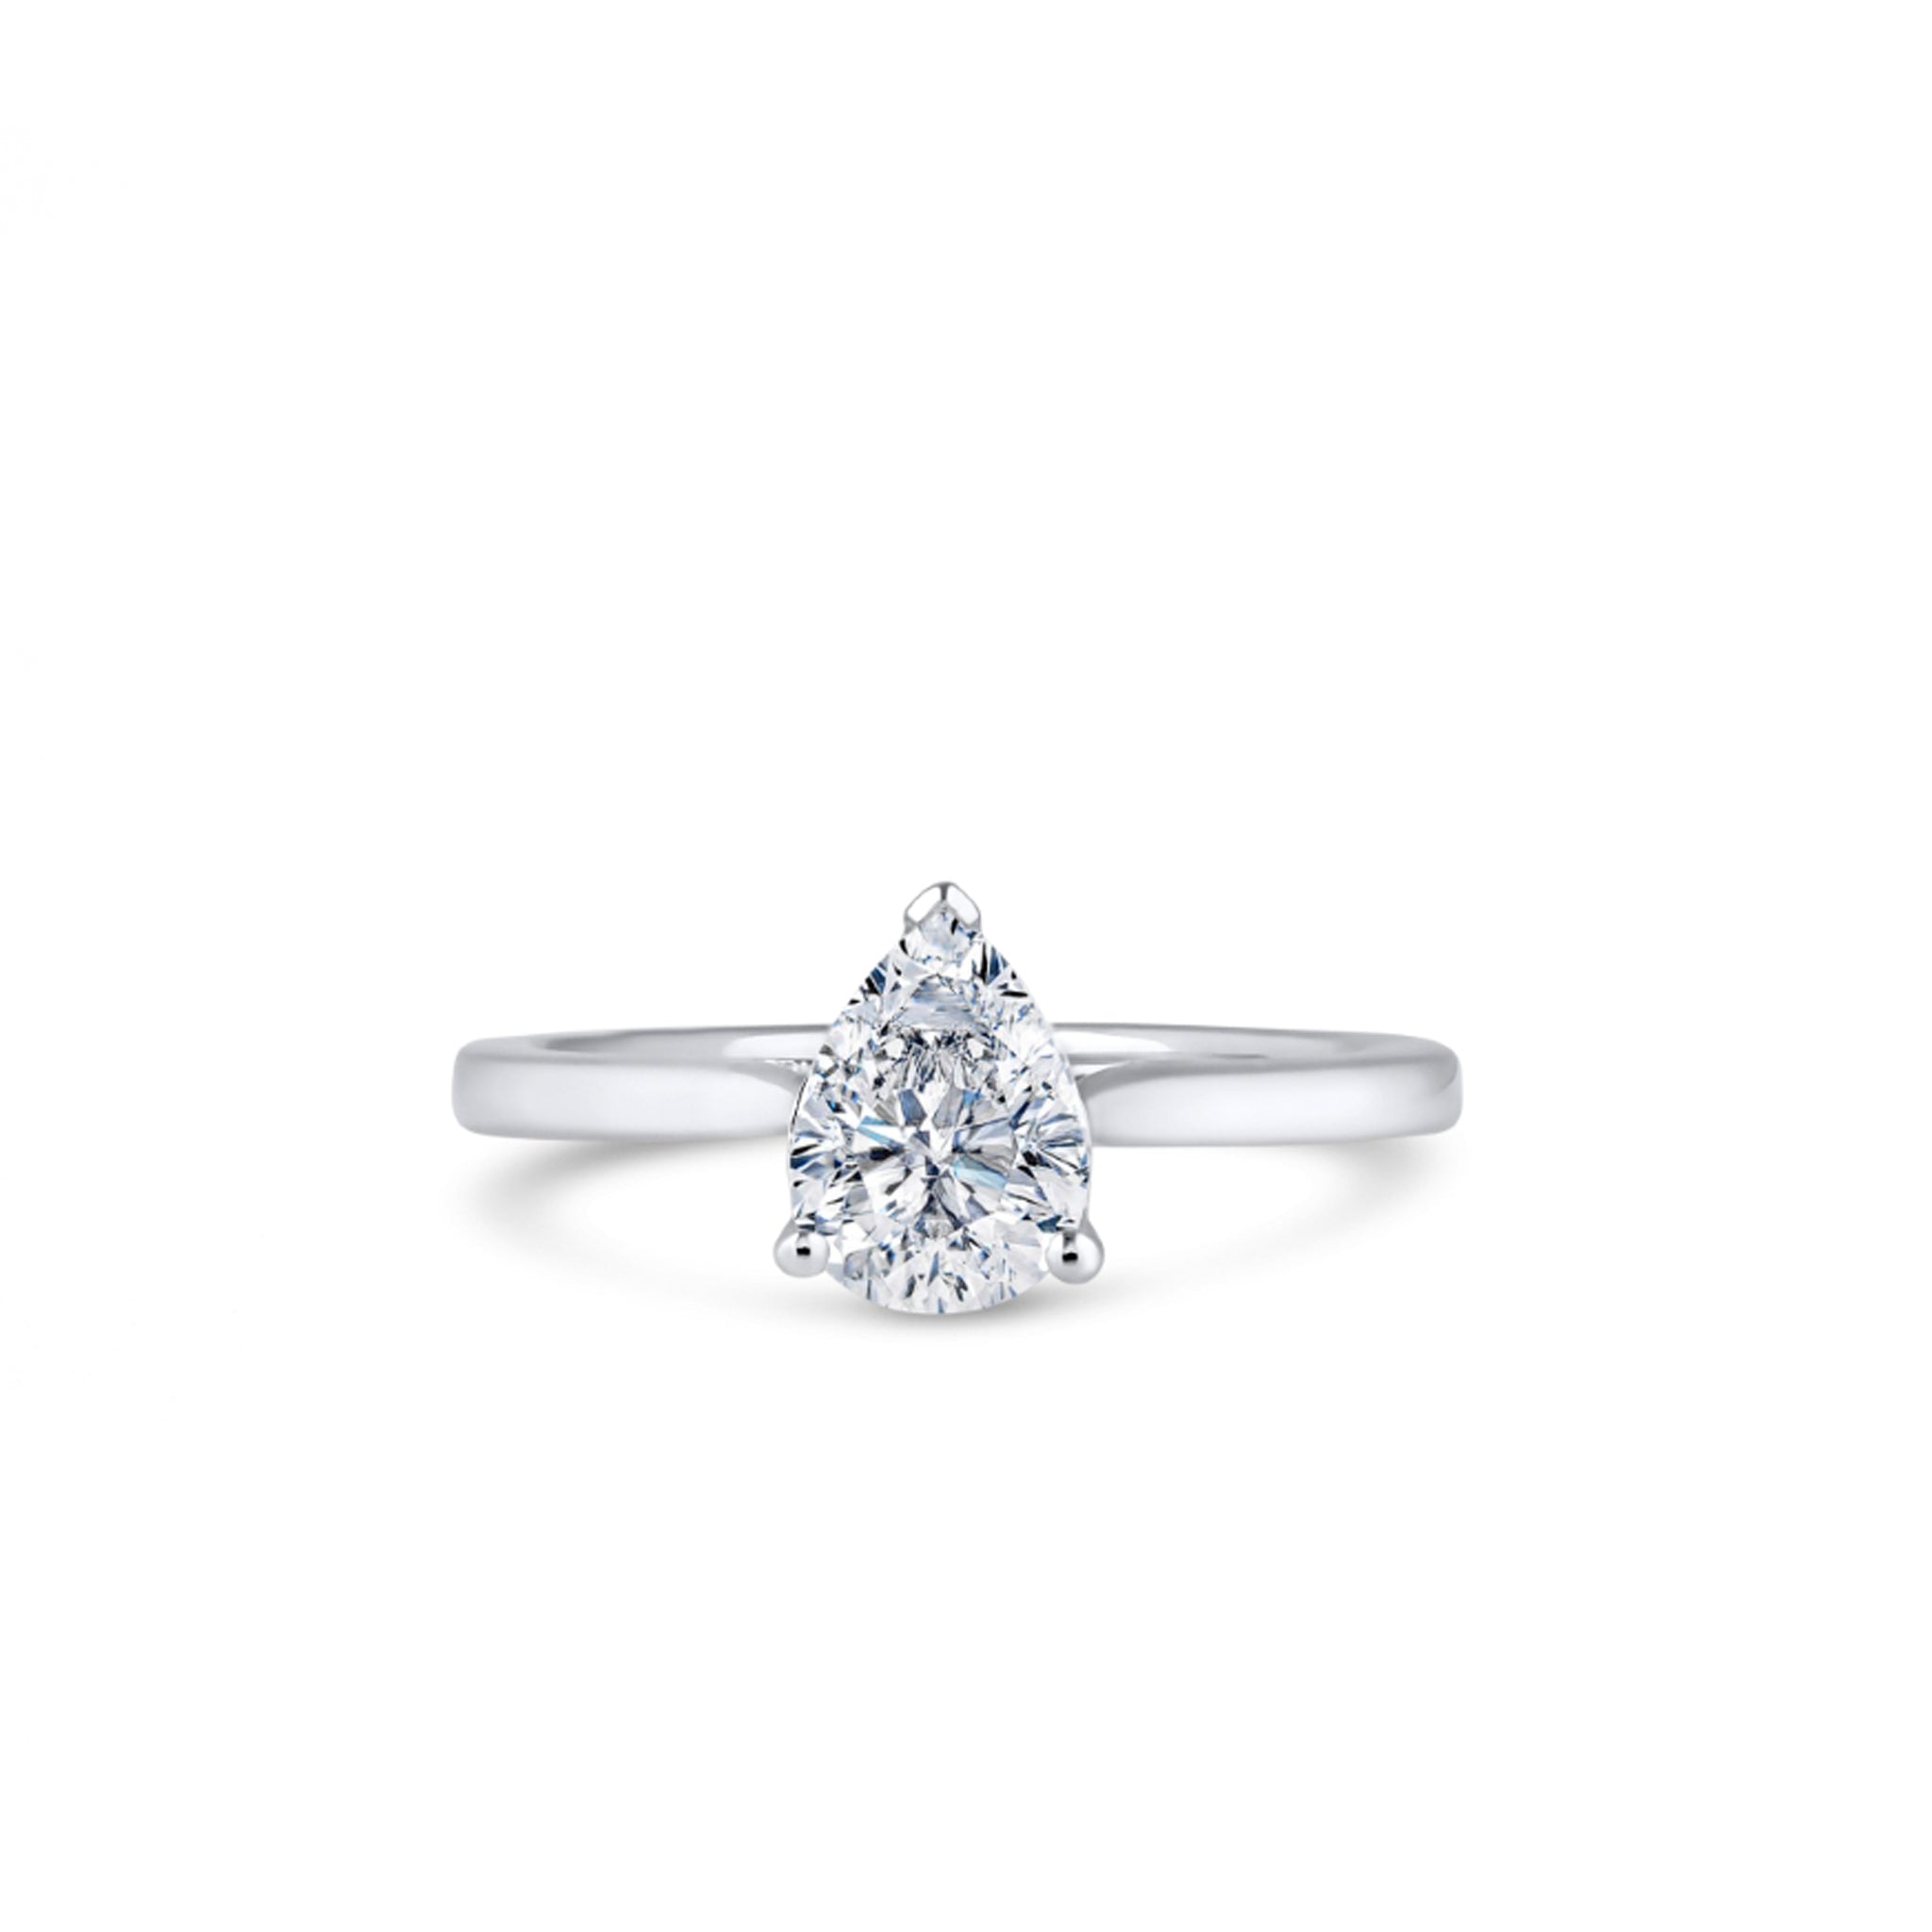 Experience timeless elegance with our 18ct Pear Cut Diamond Ring. Crafted with precision, it showcases a stunning 1.00ct pear-cut lab-grown diamond in luxurious 18ct gold. Each ring is made to order for a perfect fit and is available in Yellow Gold, White Gold, Platinum, or Rose Gold. Material: 18ct White Gold (Also Available in Yellow Gold, Rose Gold, or Platinum). Center Stone: 1.00ct Pear Cut Lab Grown Diamond. Characteristics: D Colour, VVS1 Clarity. Customization: Made to Order